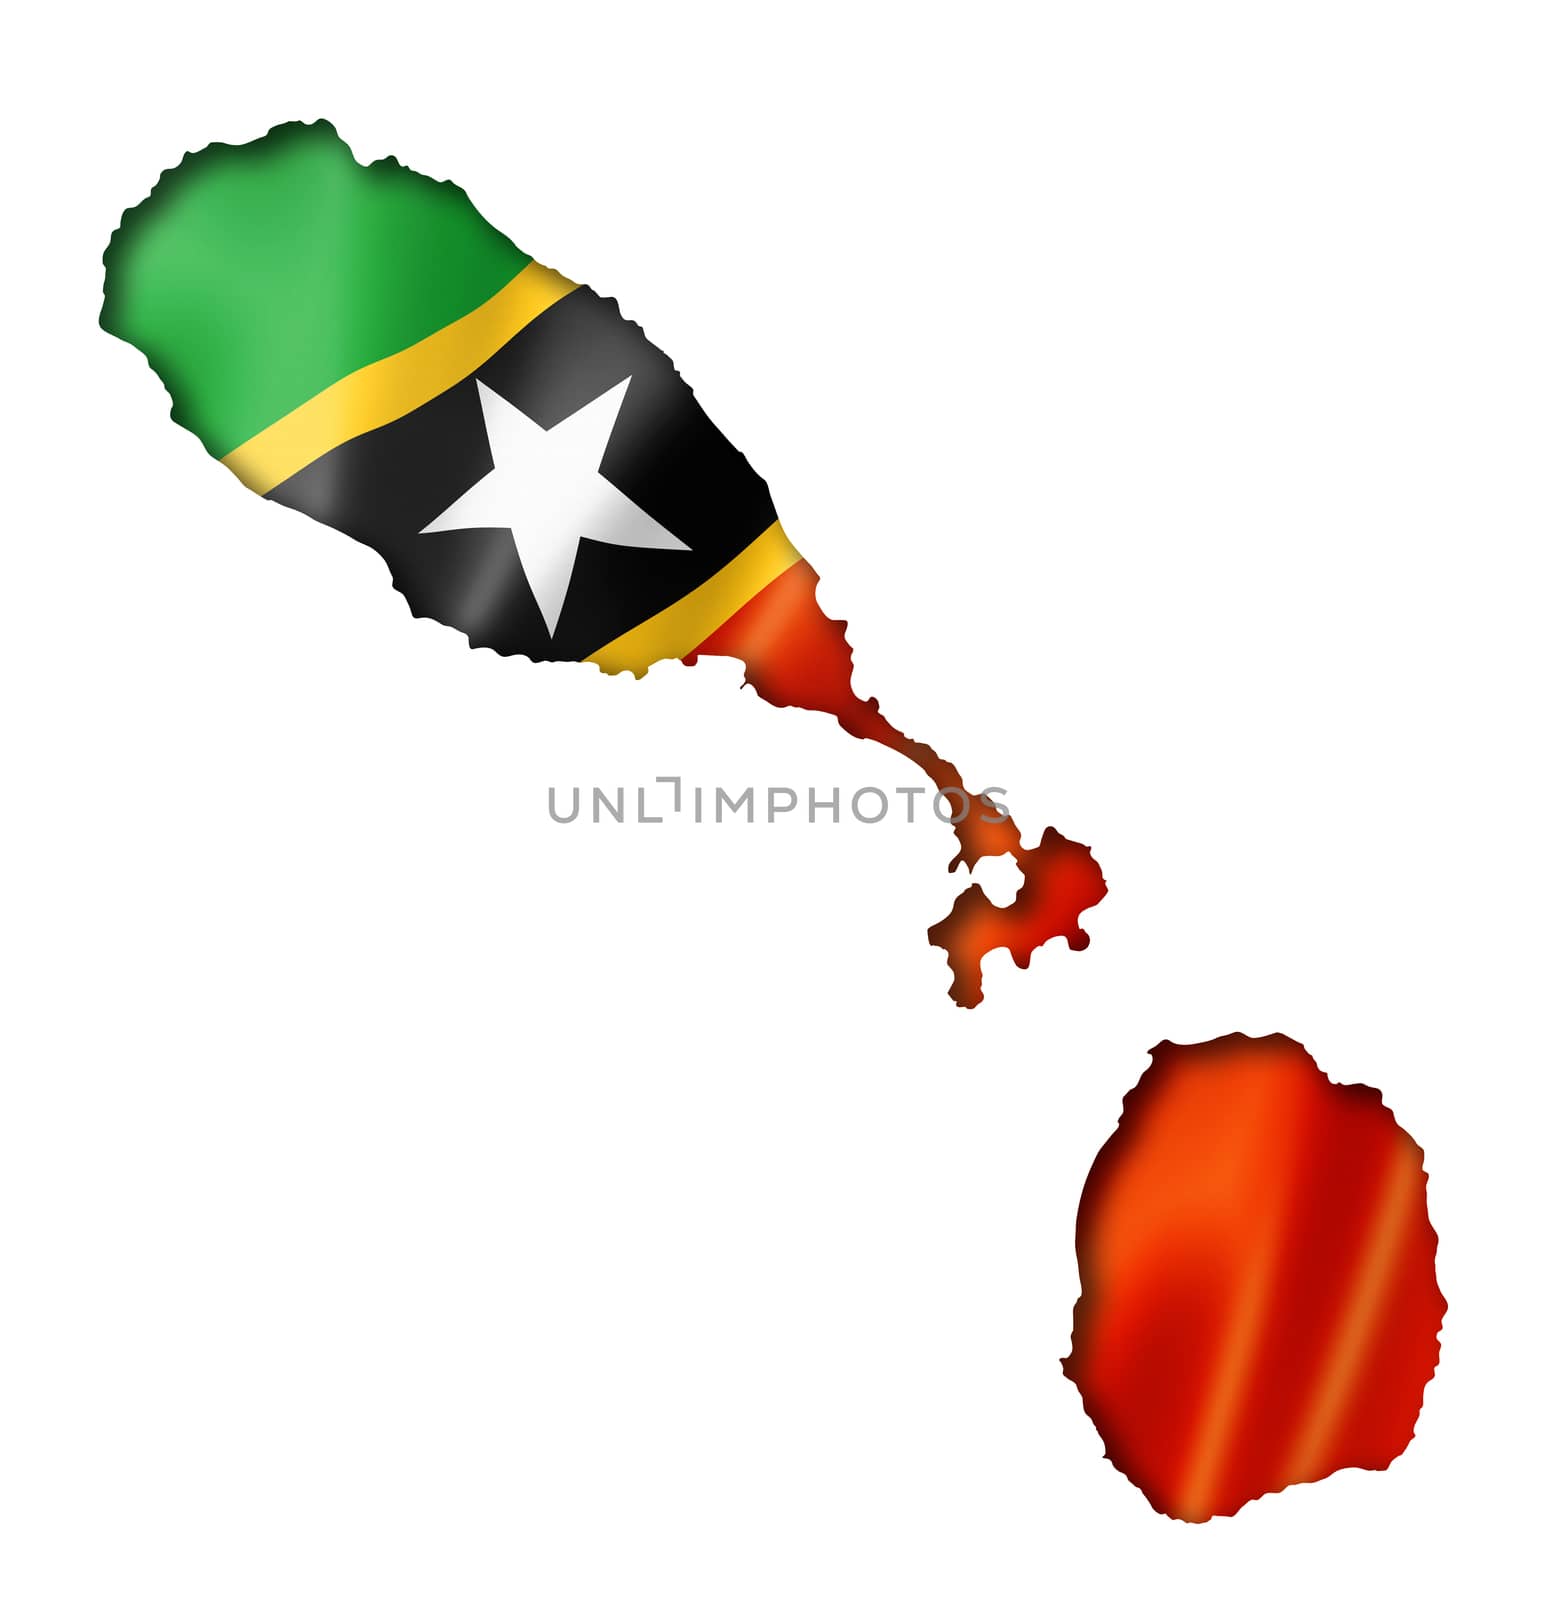 Saint Kitts And Nevis flag map, three dimensional render, isolated on white